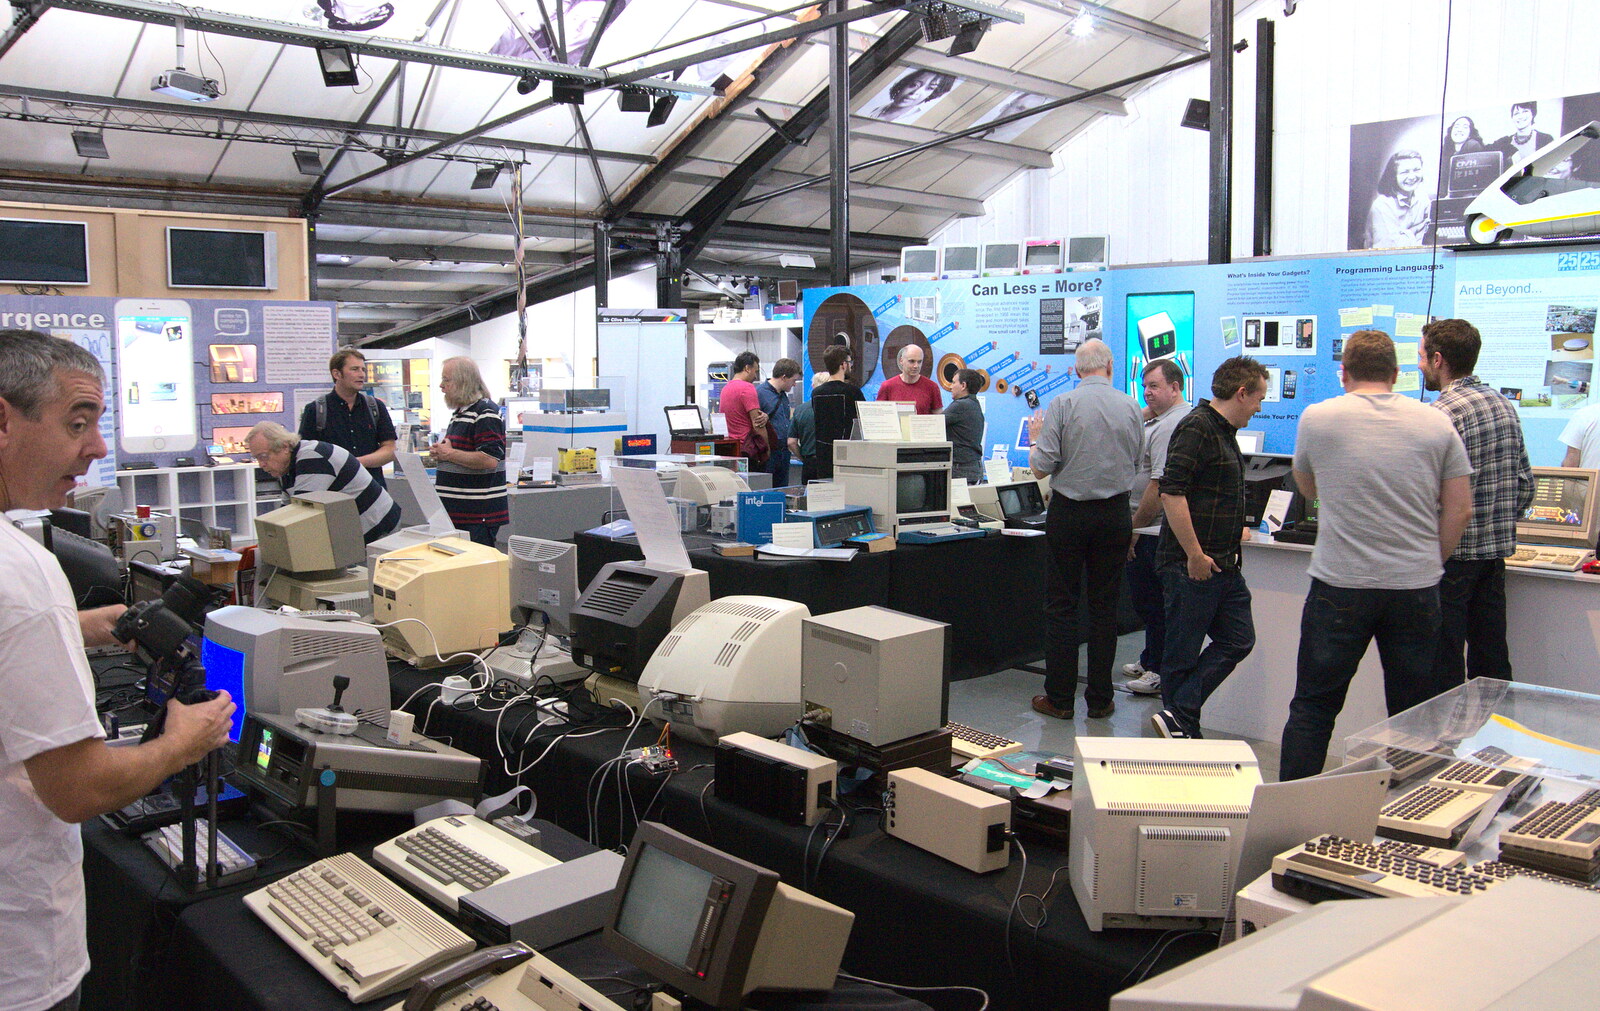 A room full of vintage hardware from The Retro Computer Festival, Centre For Computing History, Cambridge - 15th September 2018